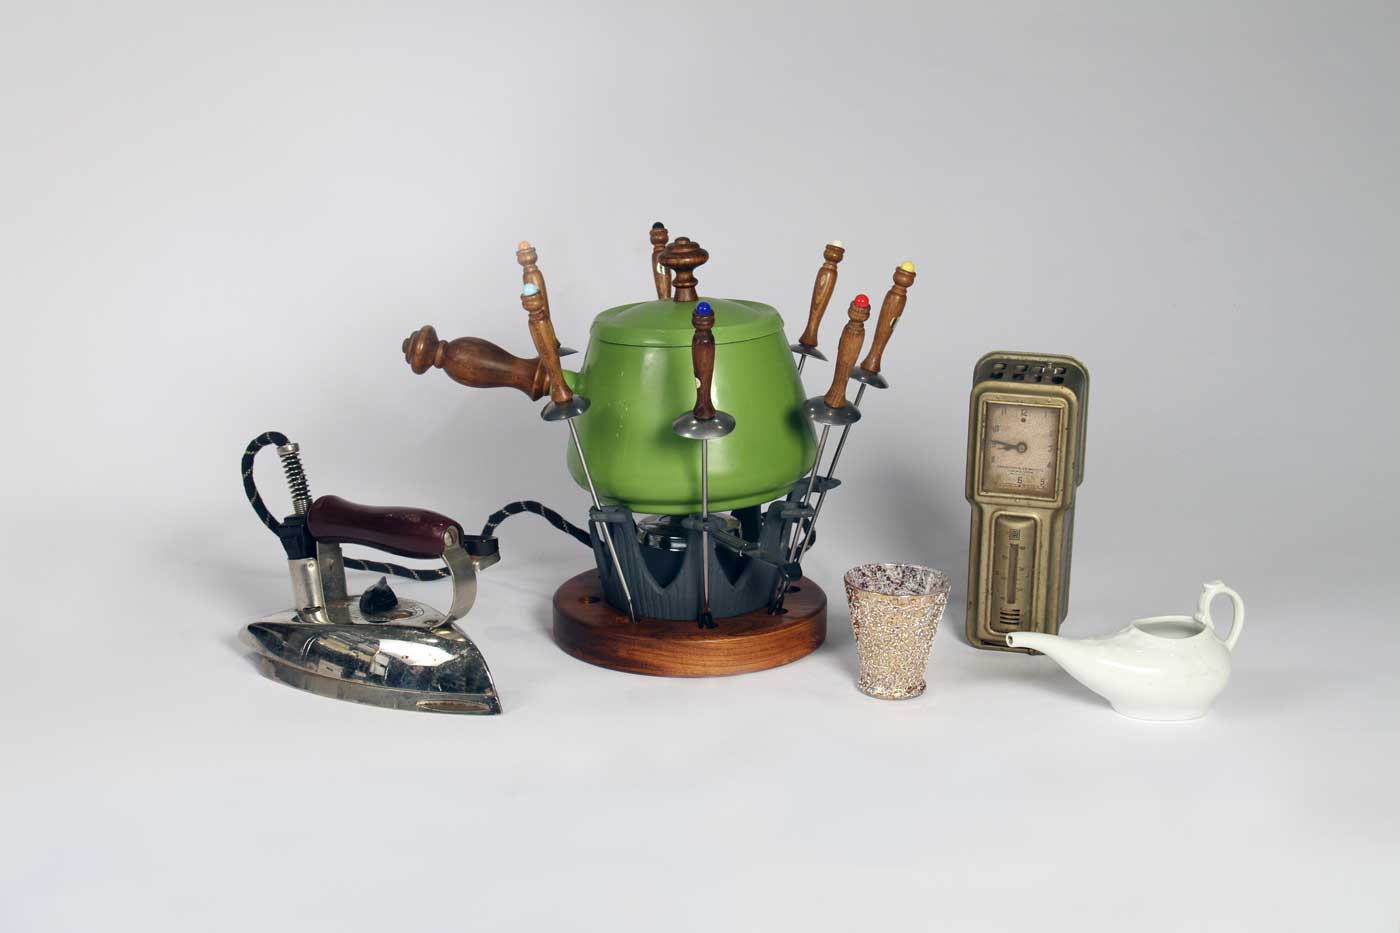 Iron, 1930s; Fondue set, 1970s; Cocktail glass, 1950s; Thermostat, 1920s; Pap feeder, 1880s. Photo by Museum staff.